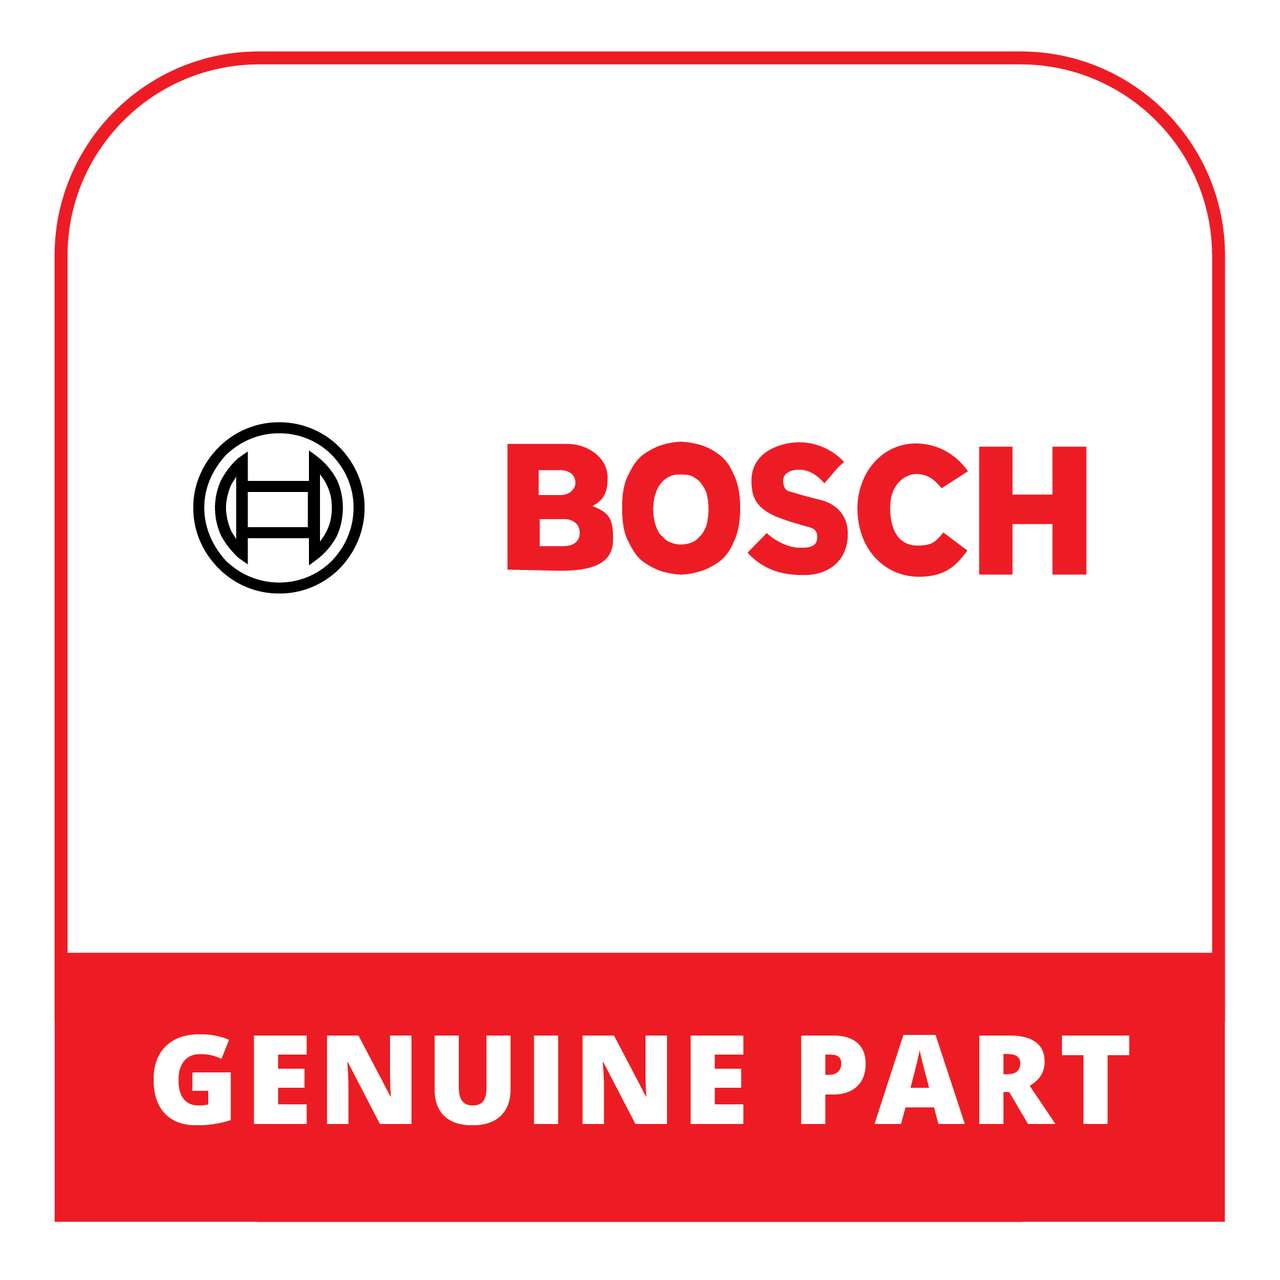 Bosch (Thermador) 10014121 - Key - Genuine Bosch (Thermador) Part